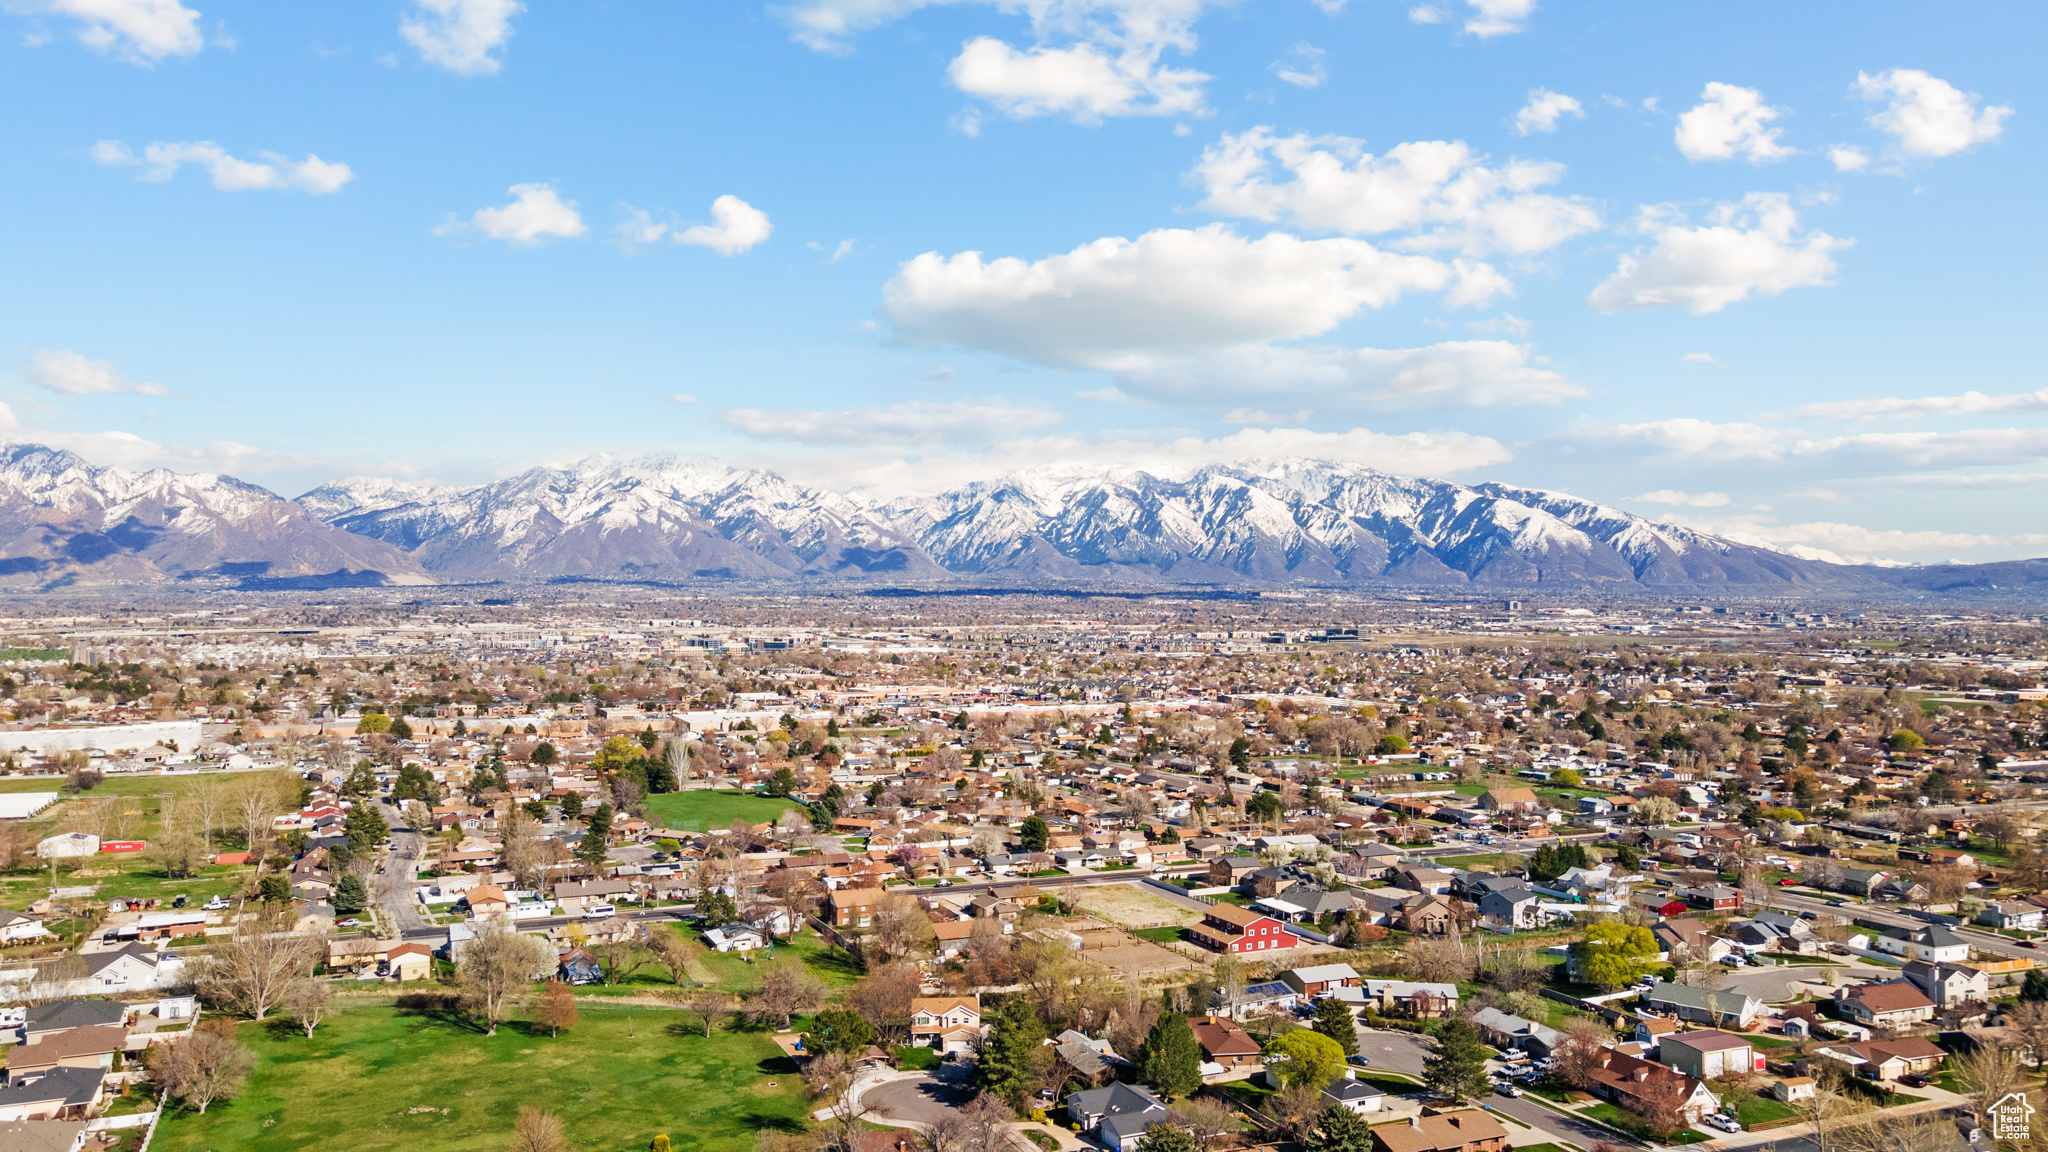 Bird's eye view with a mountain view and view of the community park